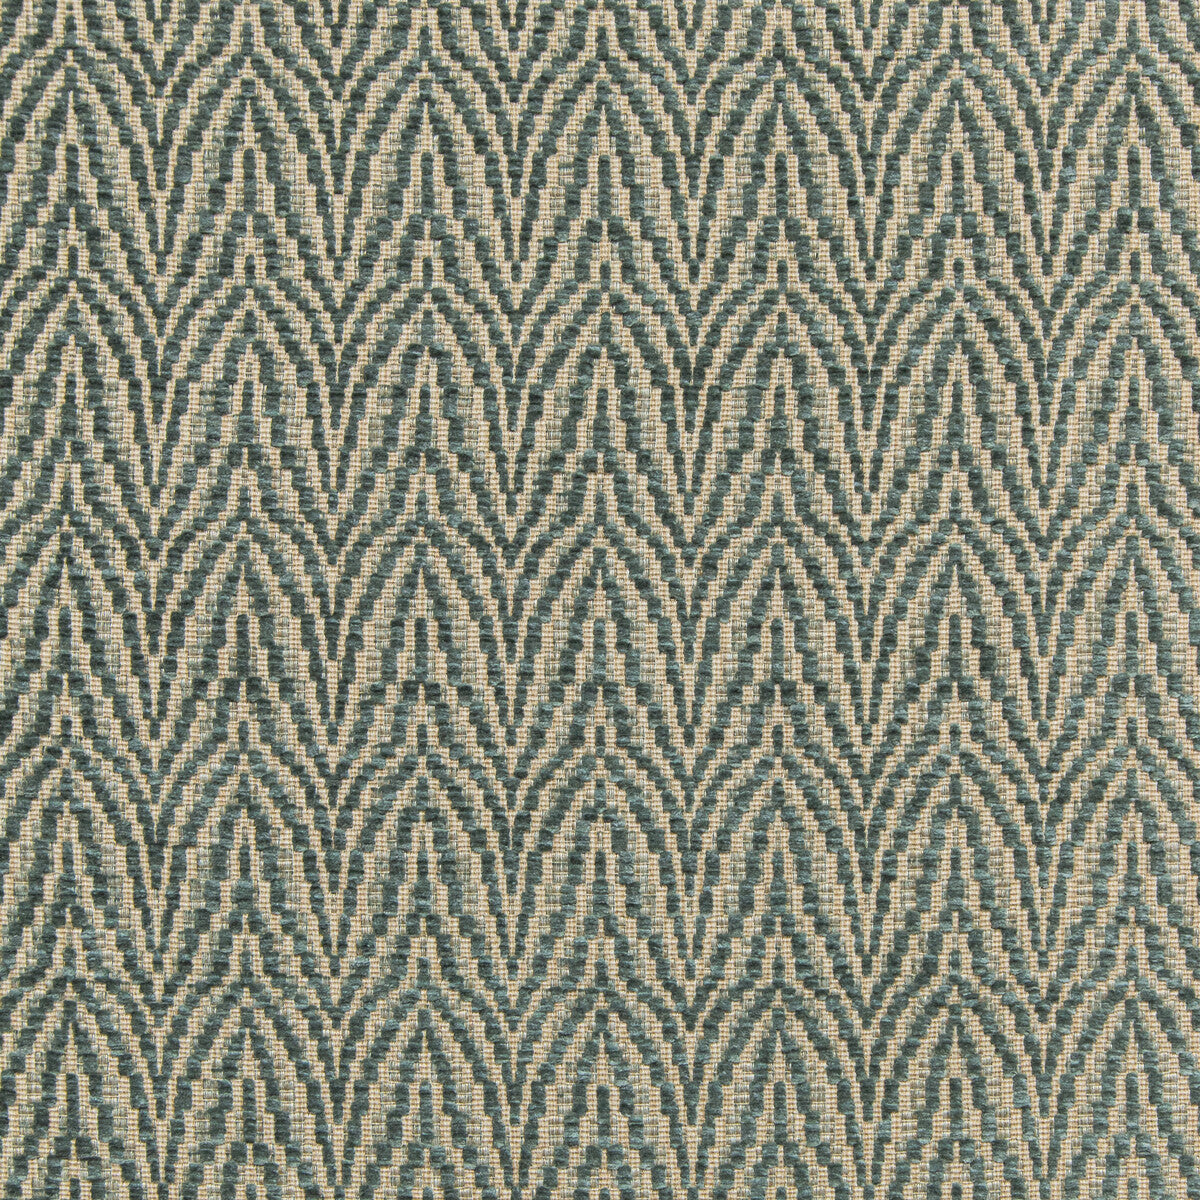 Blyth Weave fabric in mist color - pattern 2020108.13.0 - by Lee Jofa in the Linford Weaves collection